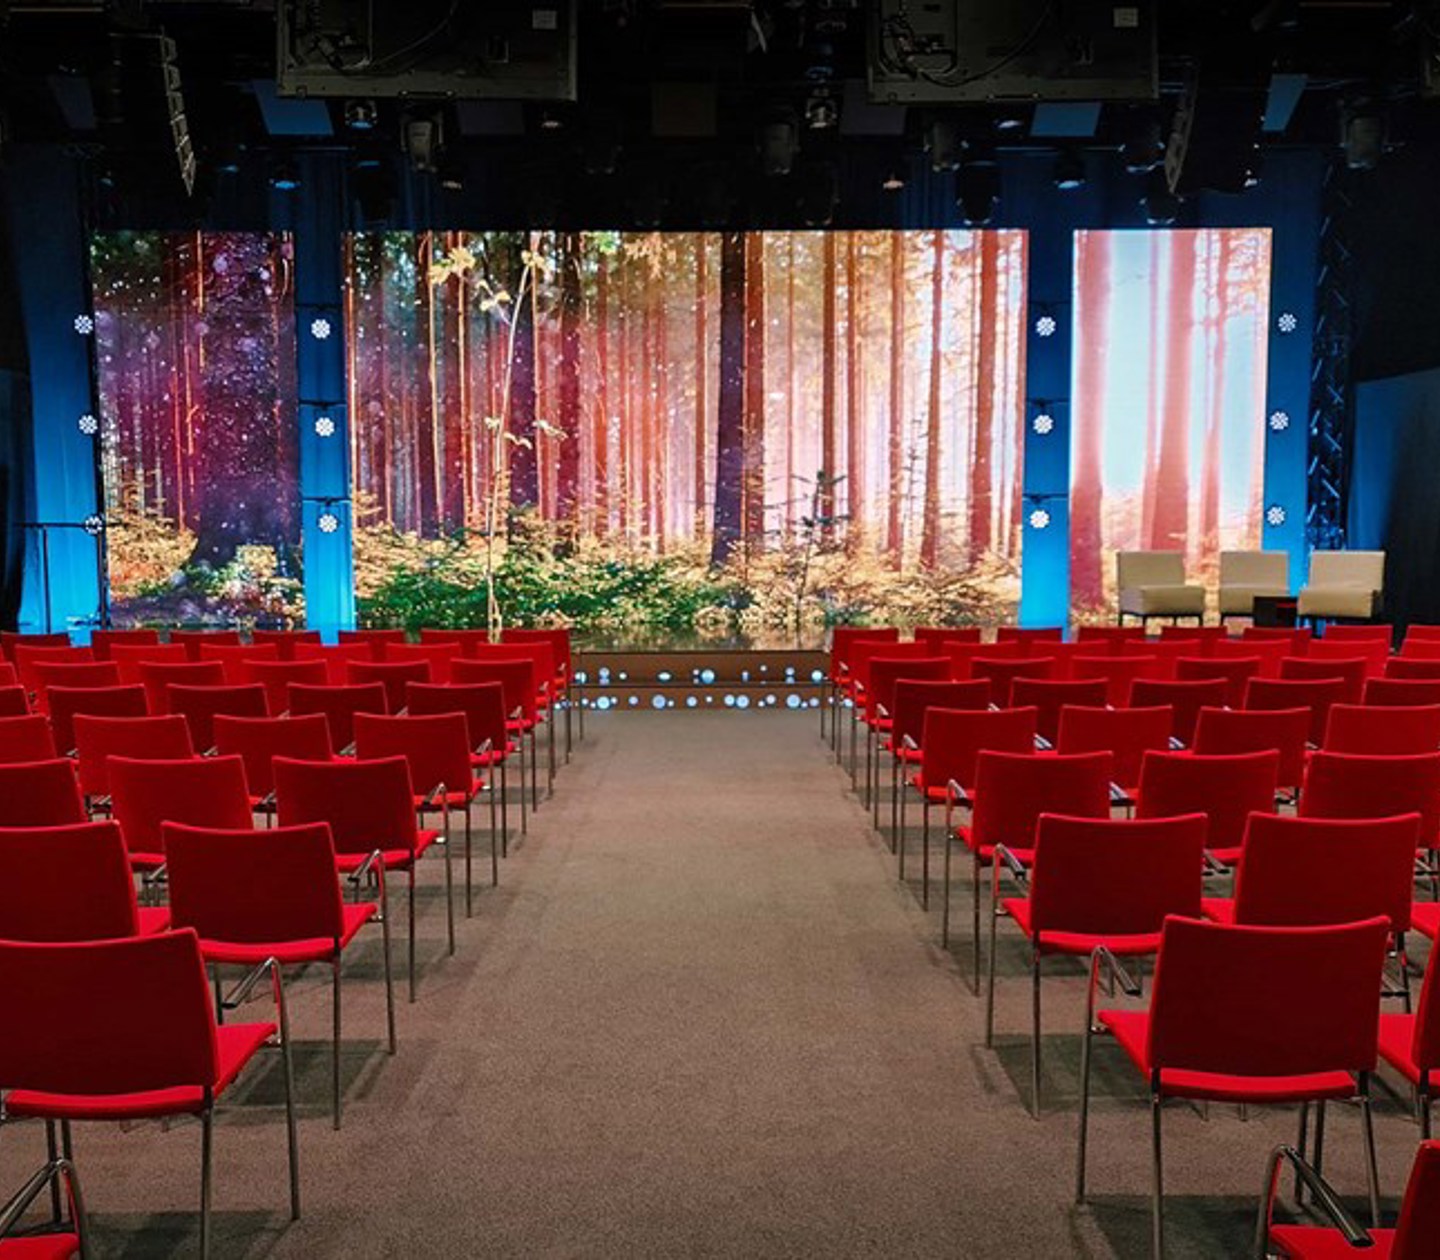 Conference with cinema seating, red chairs and TV studio